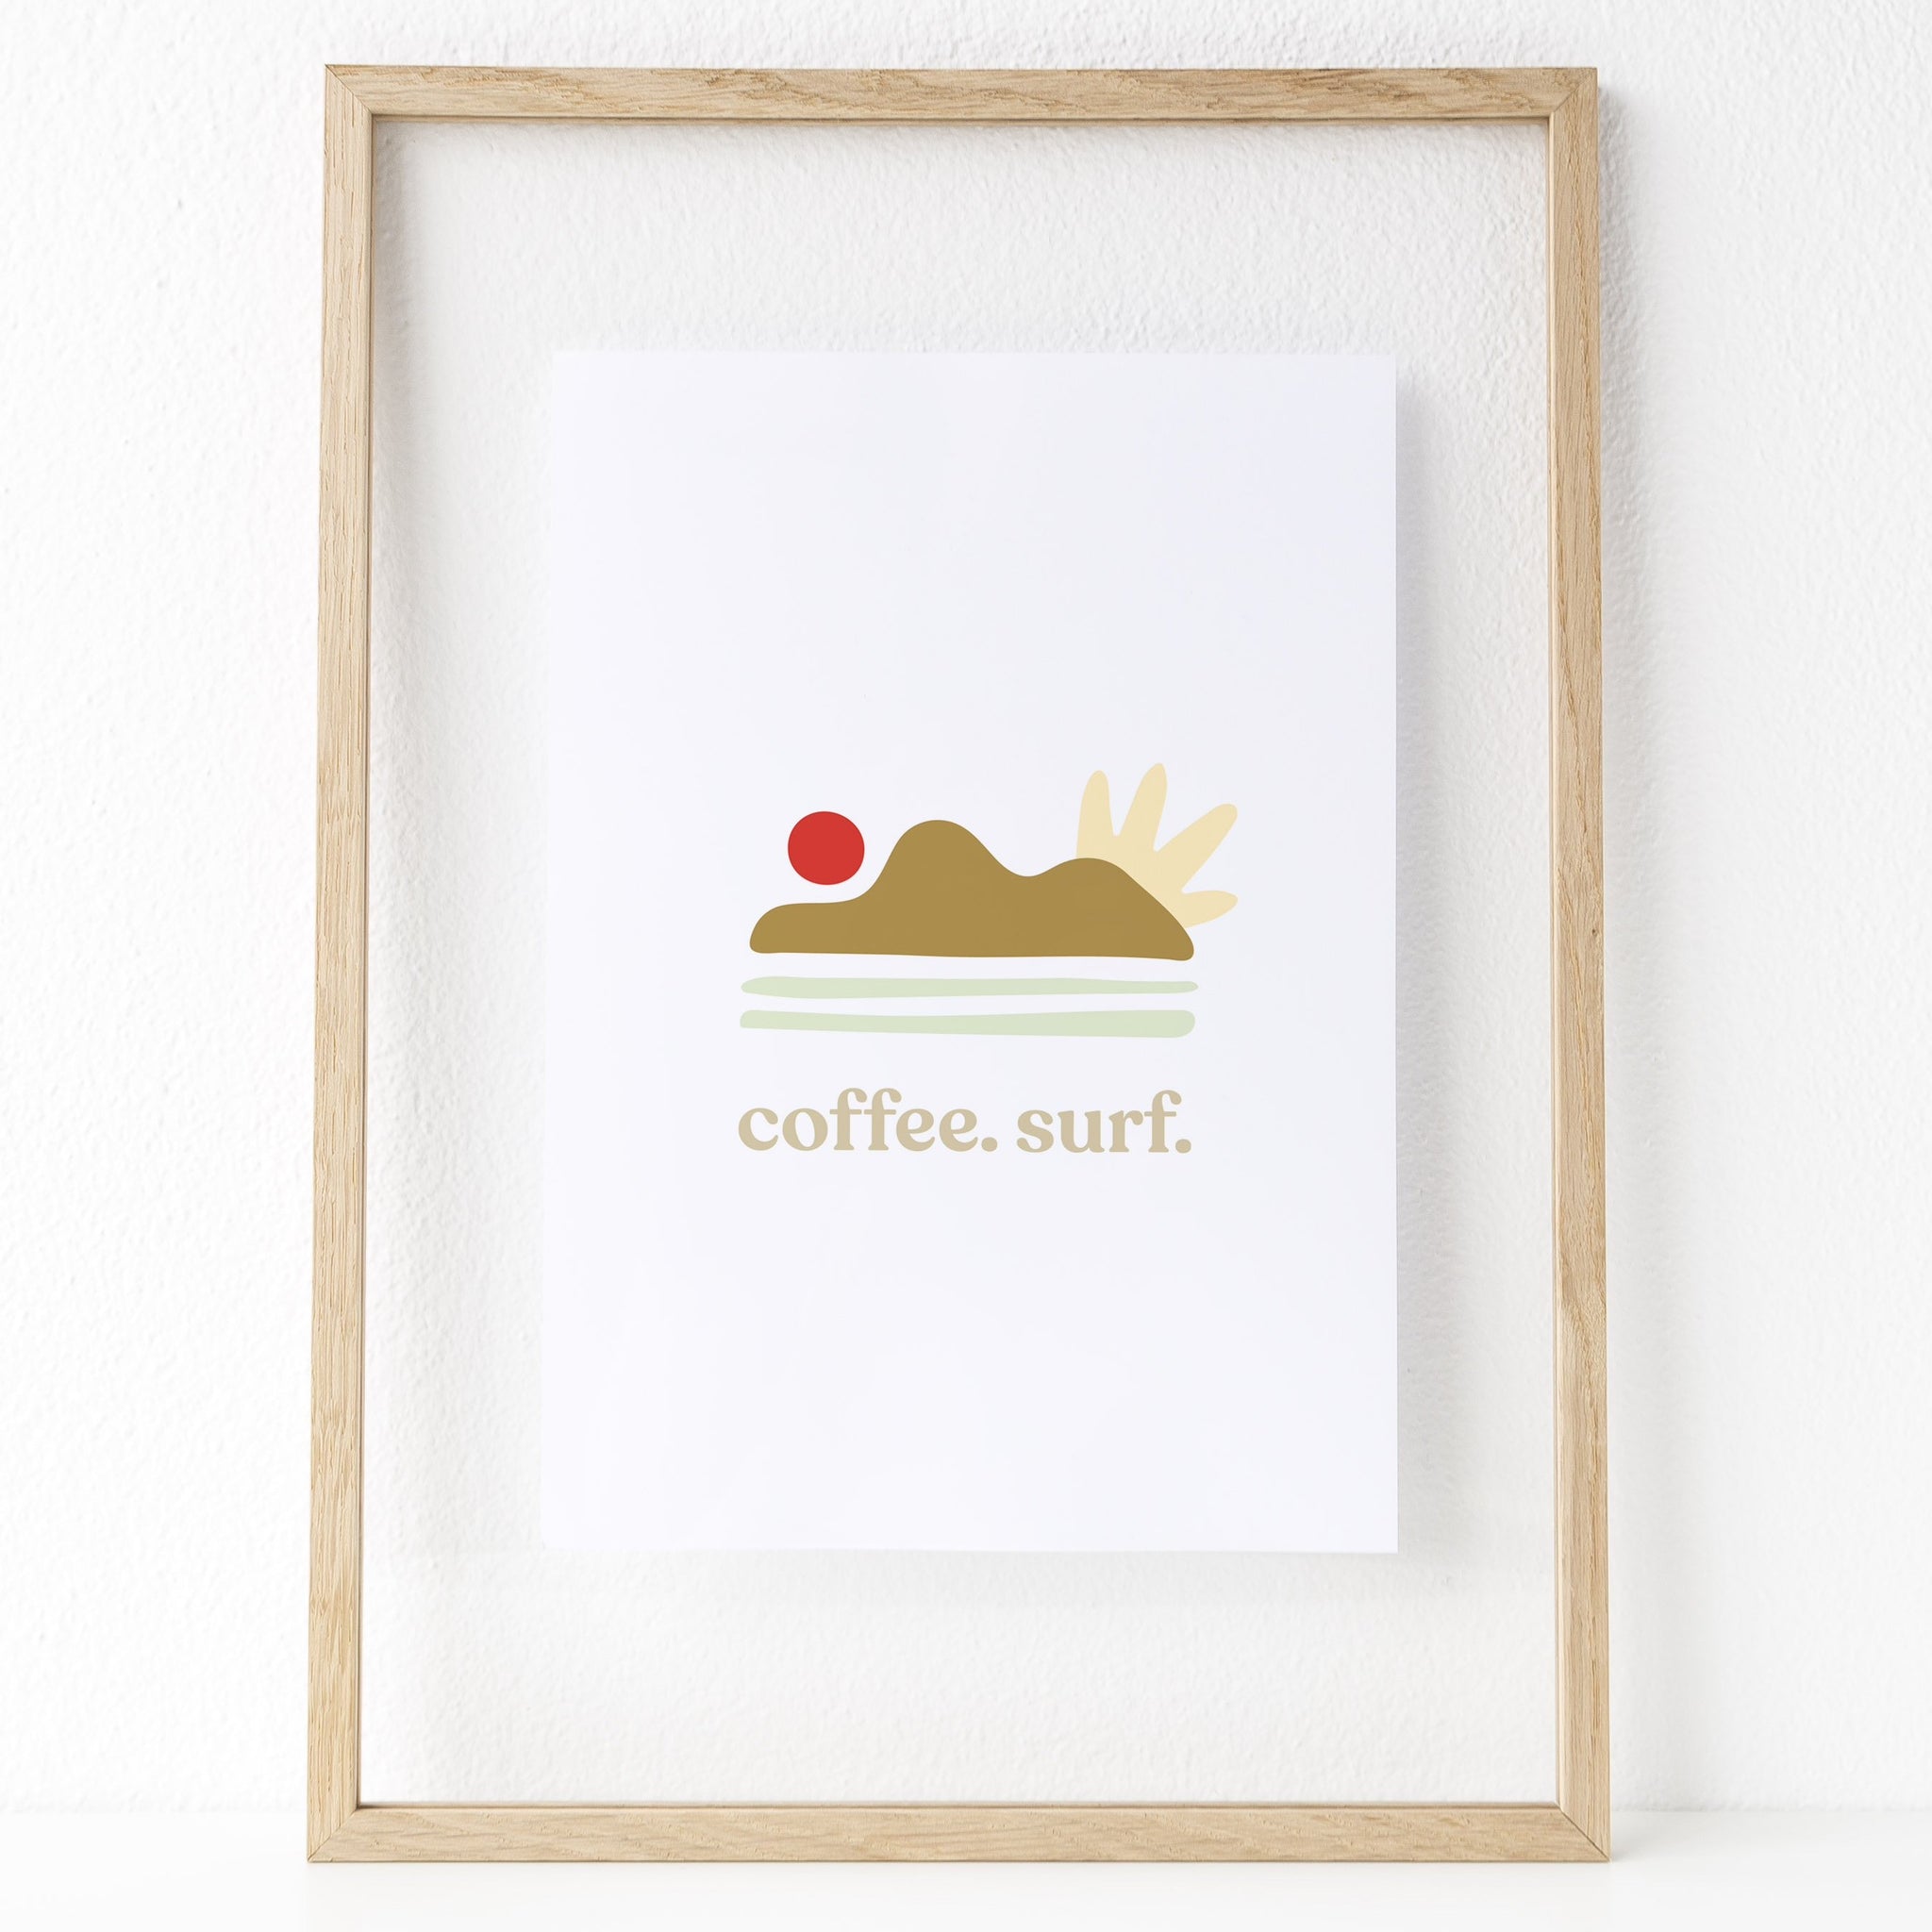 Coffee. Surf. Print. The print features some abstract shapes that resemble a sun setting over some hills. Hues of red, antique golden brown, yellow cream, and light green are features in this print. 